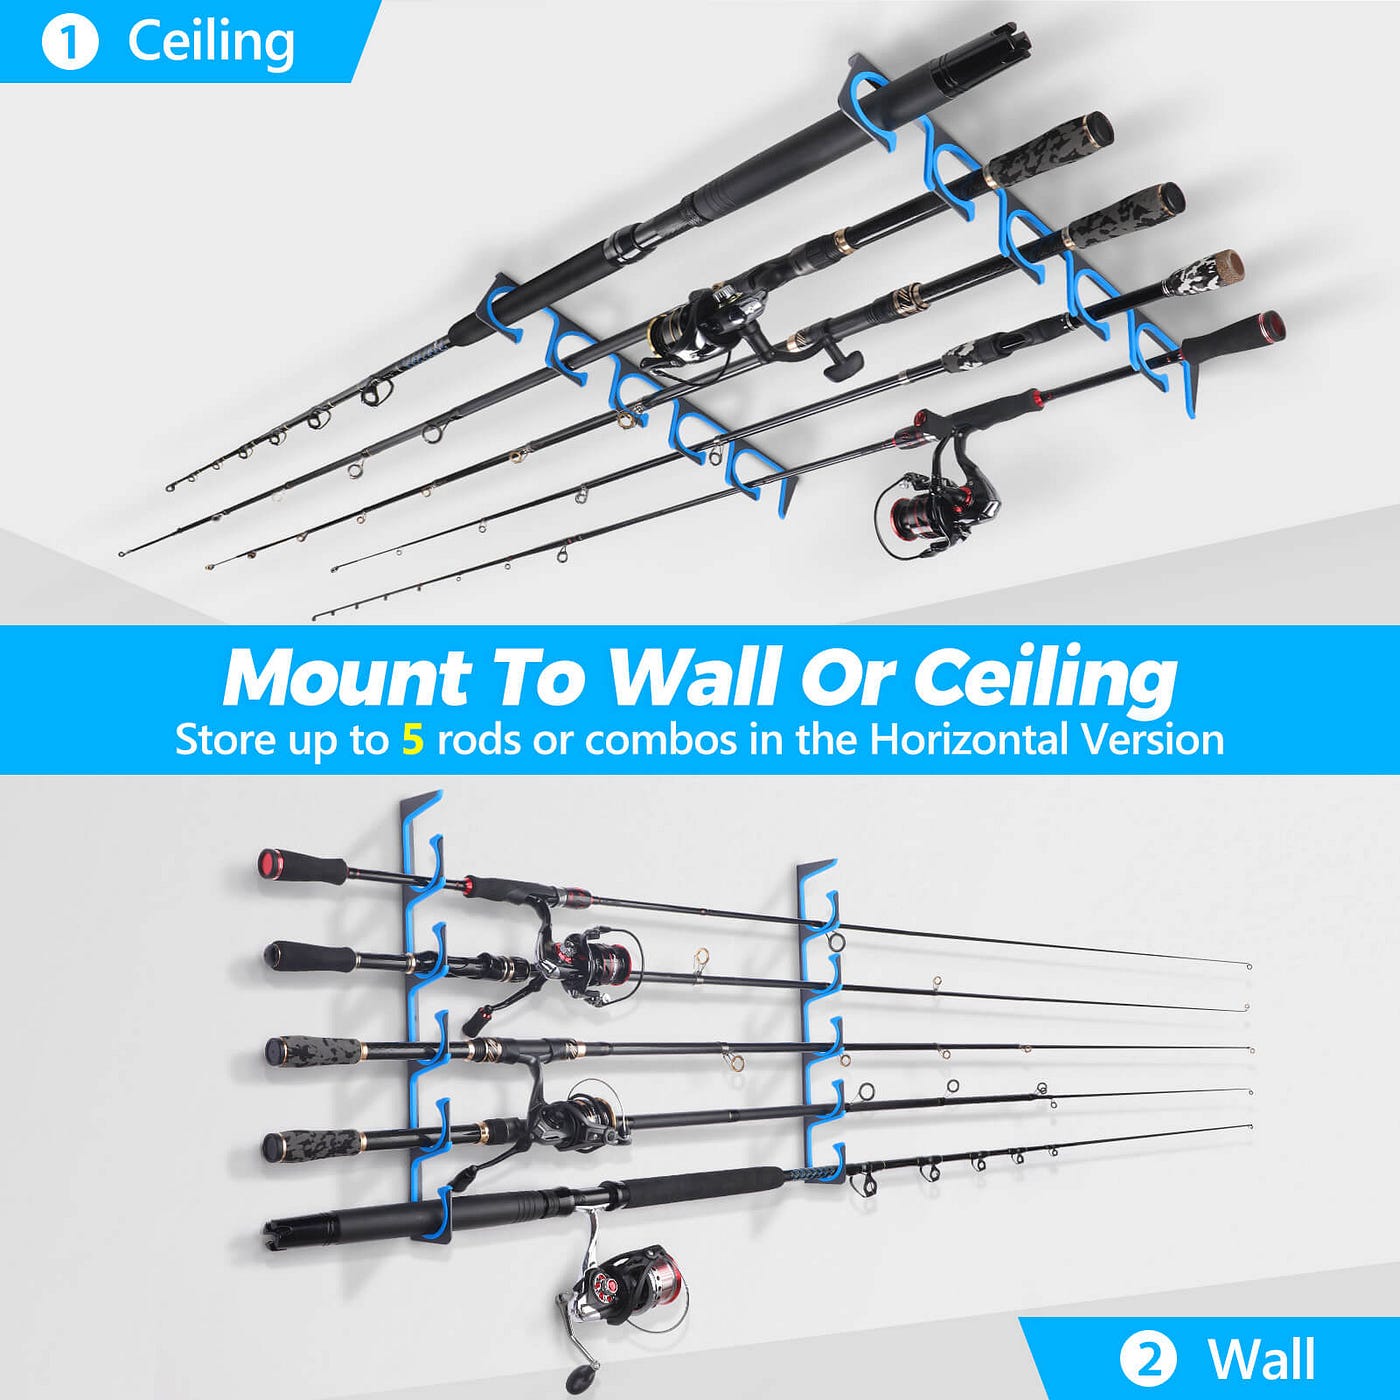 Organize Your Tackle Room with These DIY Fishing Pole Rack Ideas